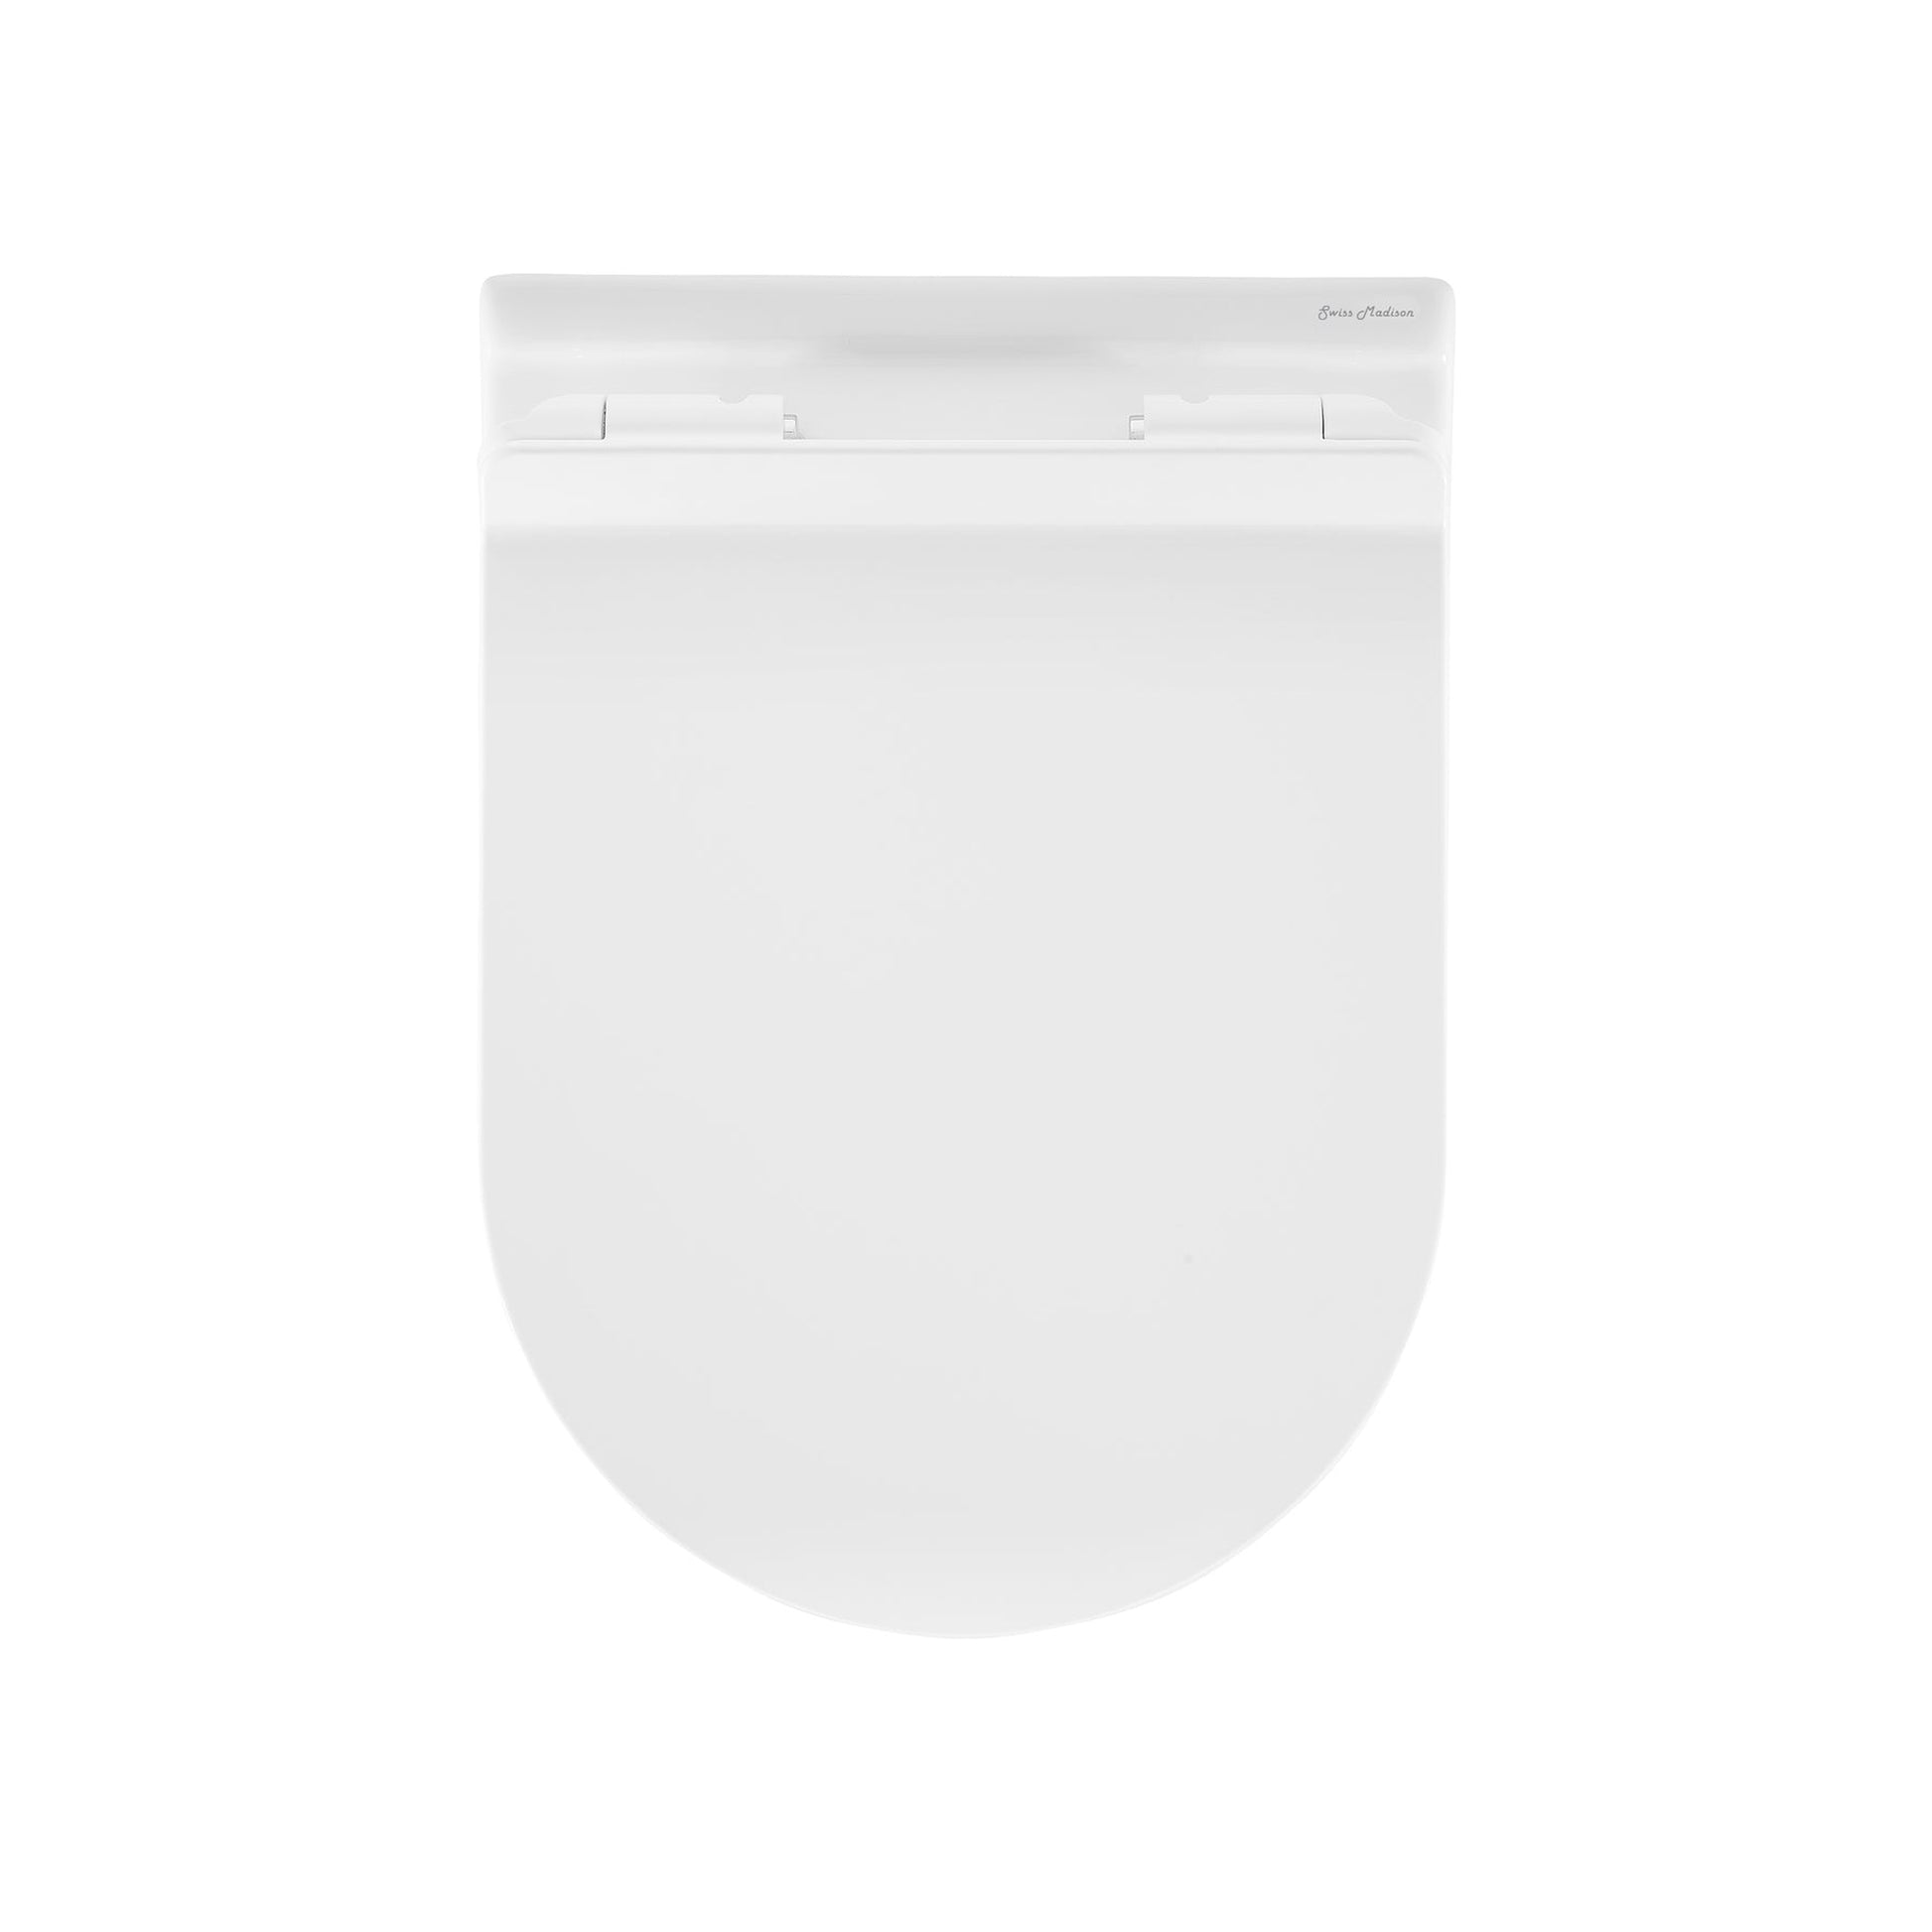 Swiss Madison Ivy 15" x 13" Glossy White Elongated Wall-Hung Toilet Bundle With In-Wall Carrier Tank and 0.8/1.6 GPF Dual-Flush Large Wall Actuator Plate